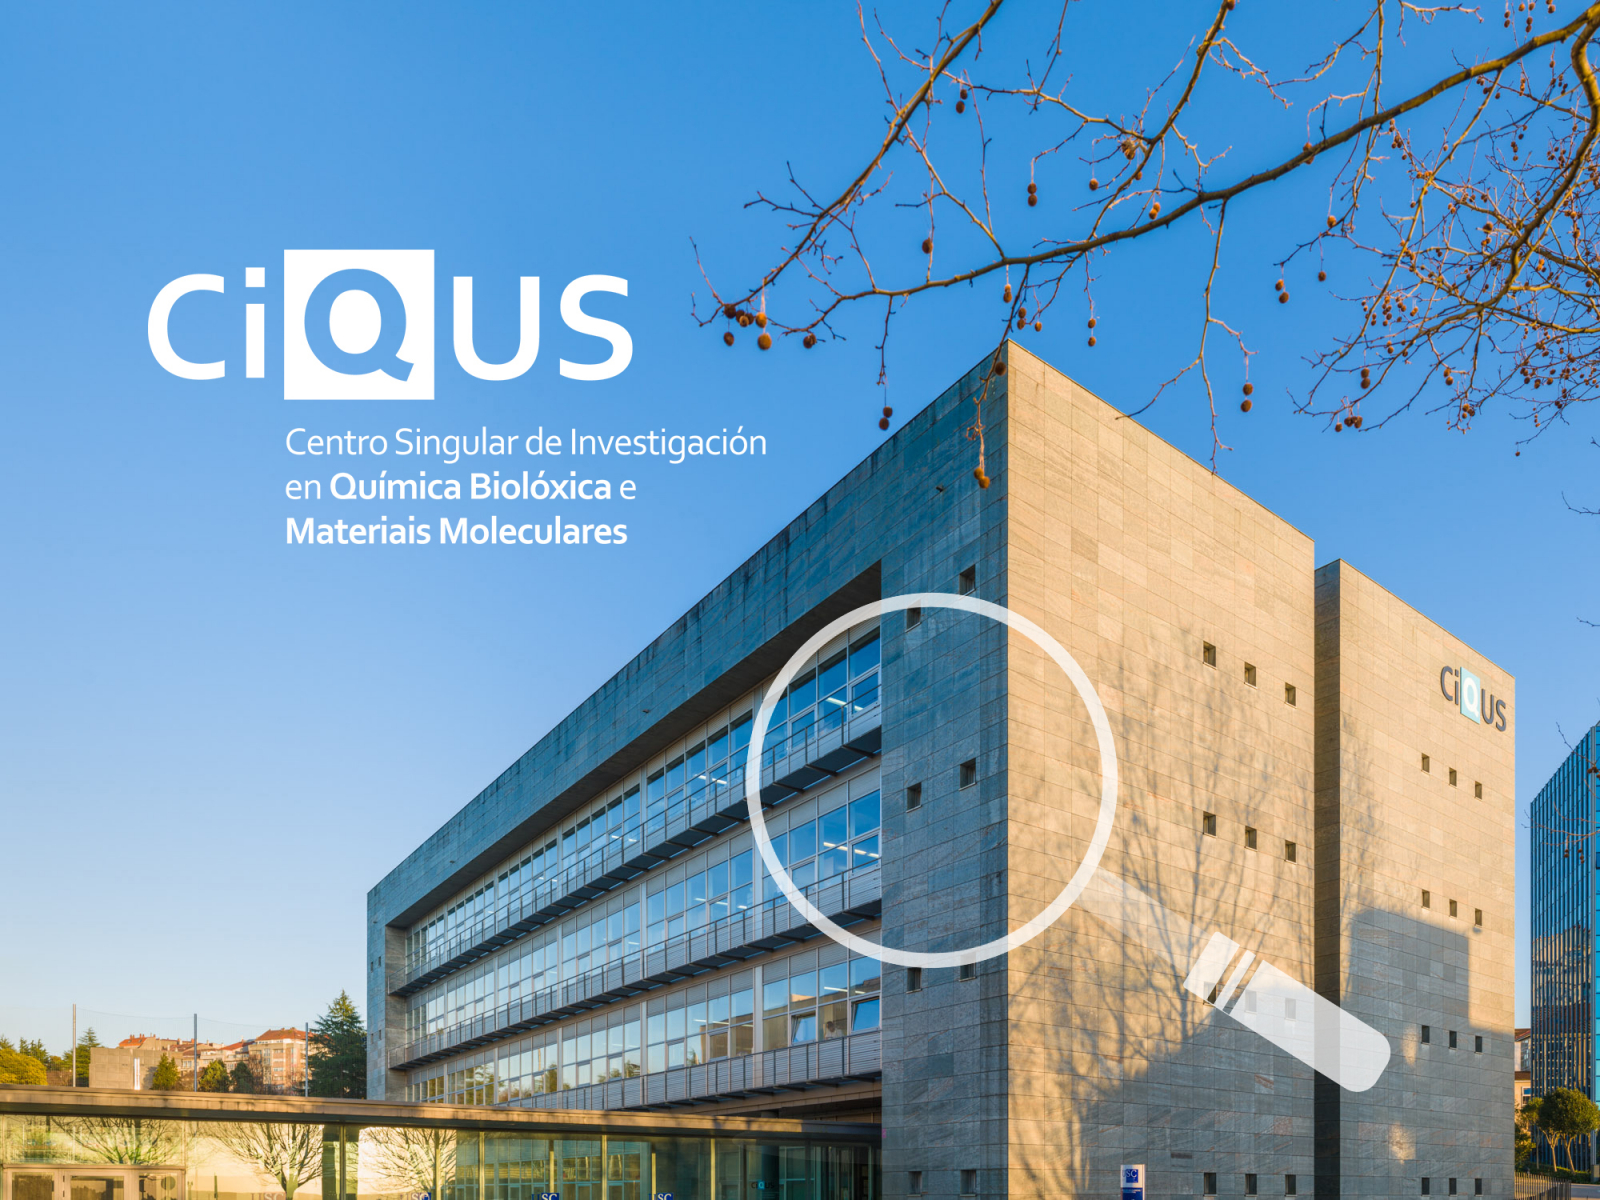 Job opportunity in the Condensed Matter Chemistry Lab at CIQUS at the University of Compostela, Spain